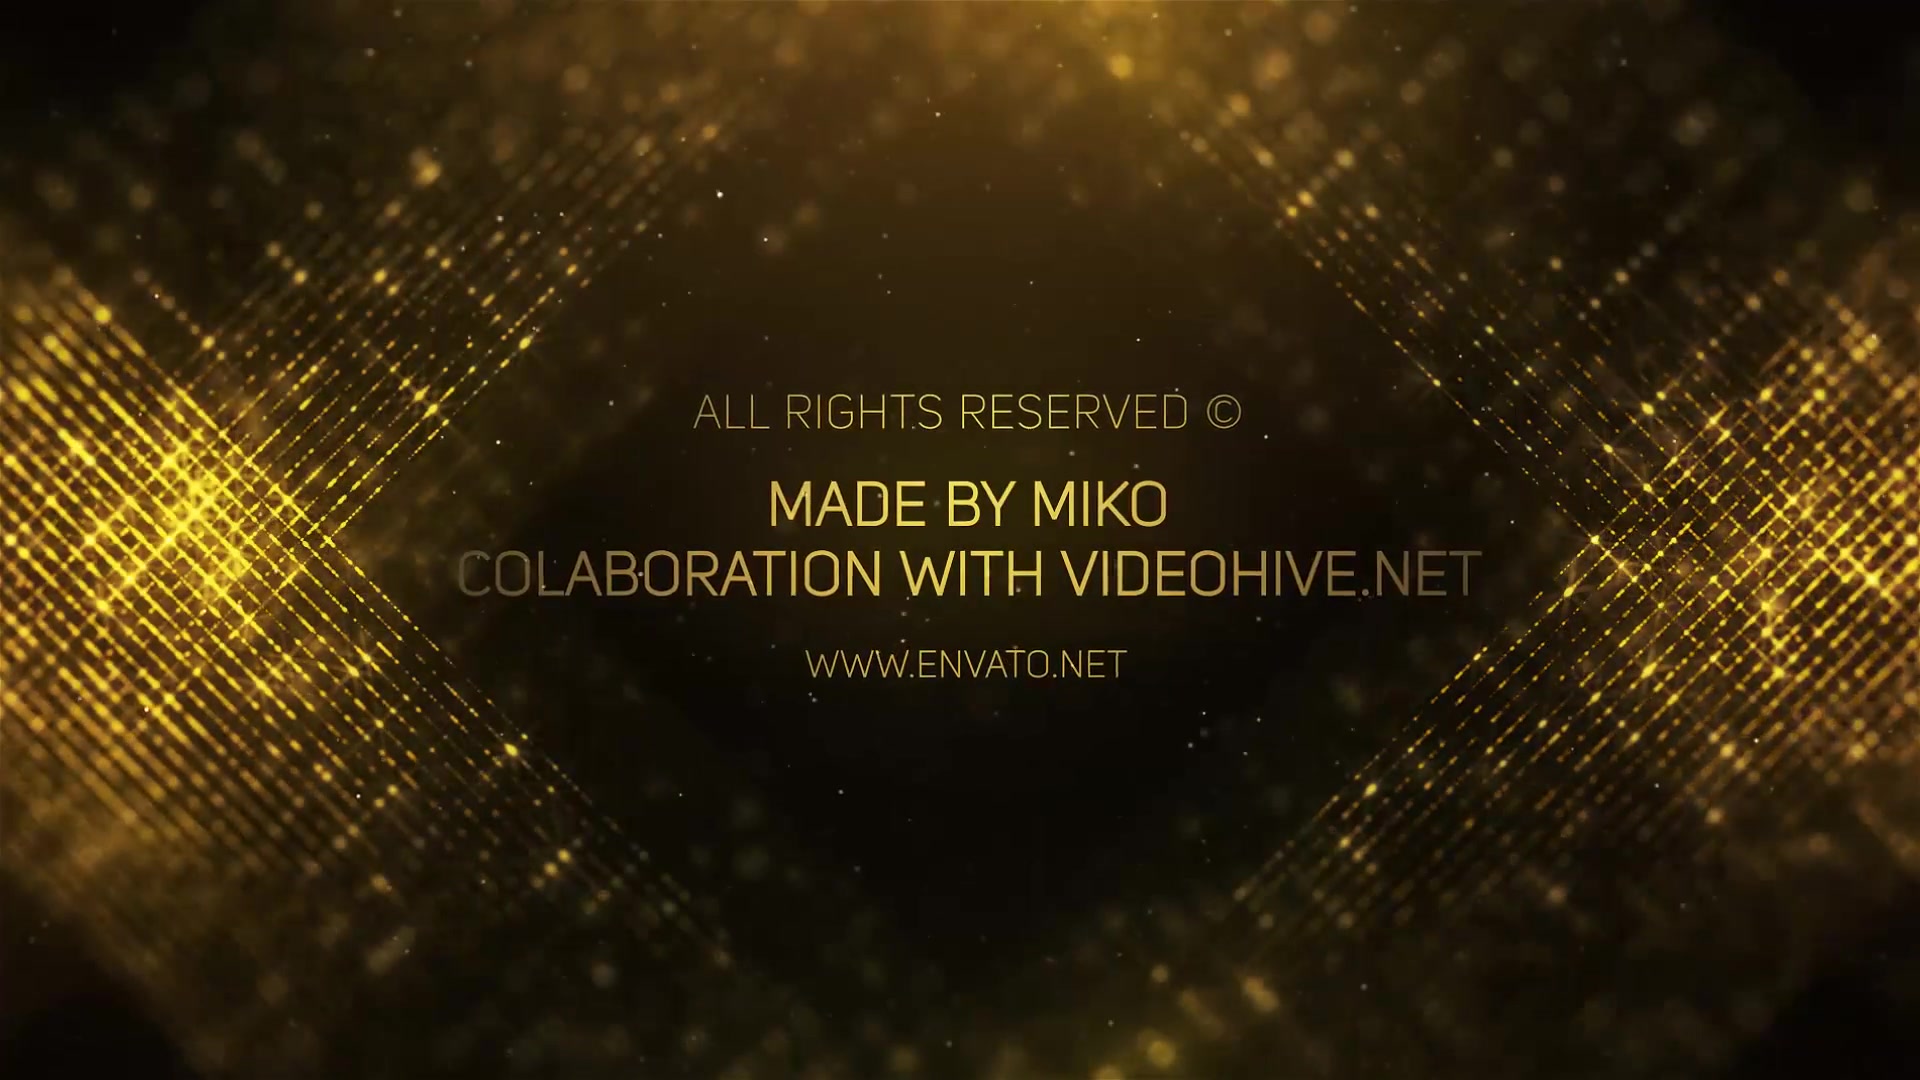 Awards Show - Download Videohive 20967530